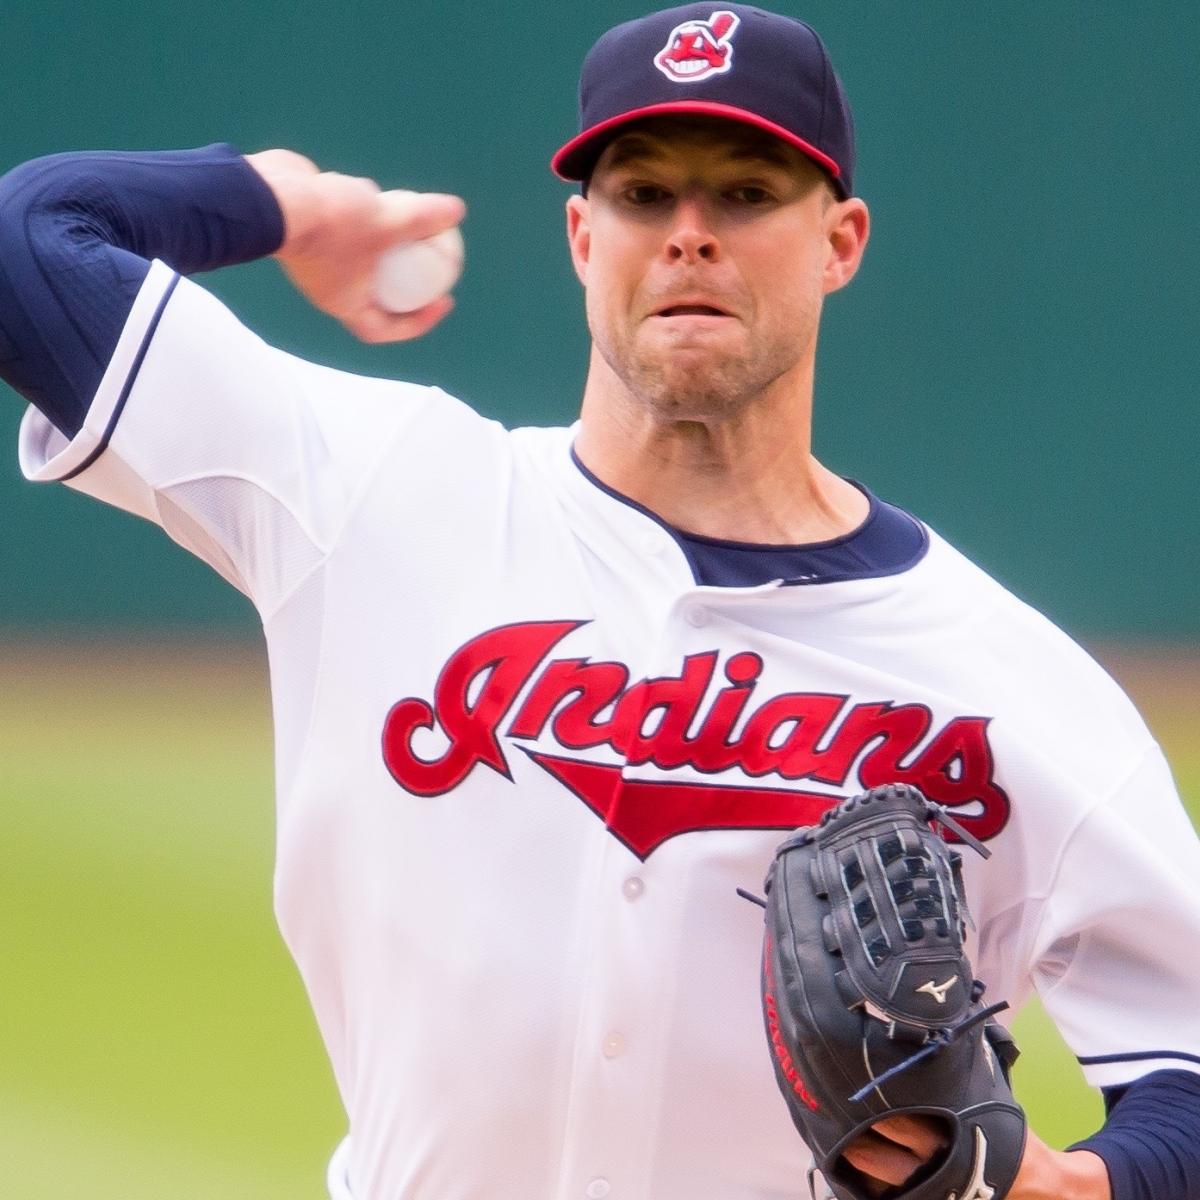 Stetson product Corey Kluber strikes out 18 for Indians